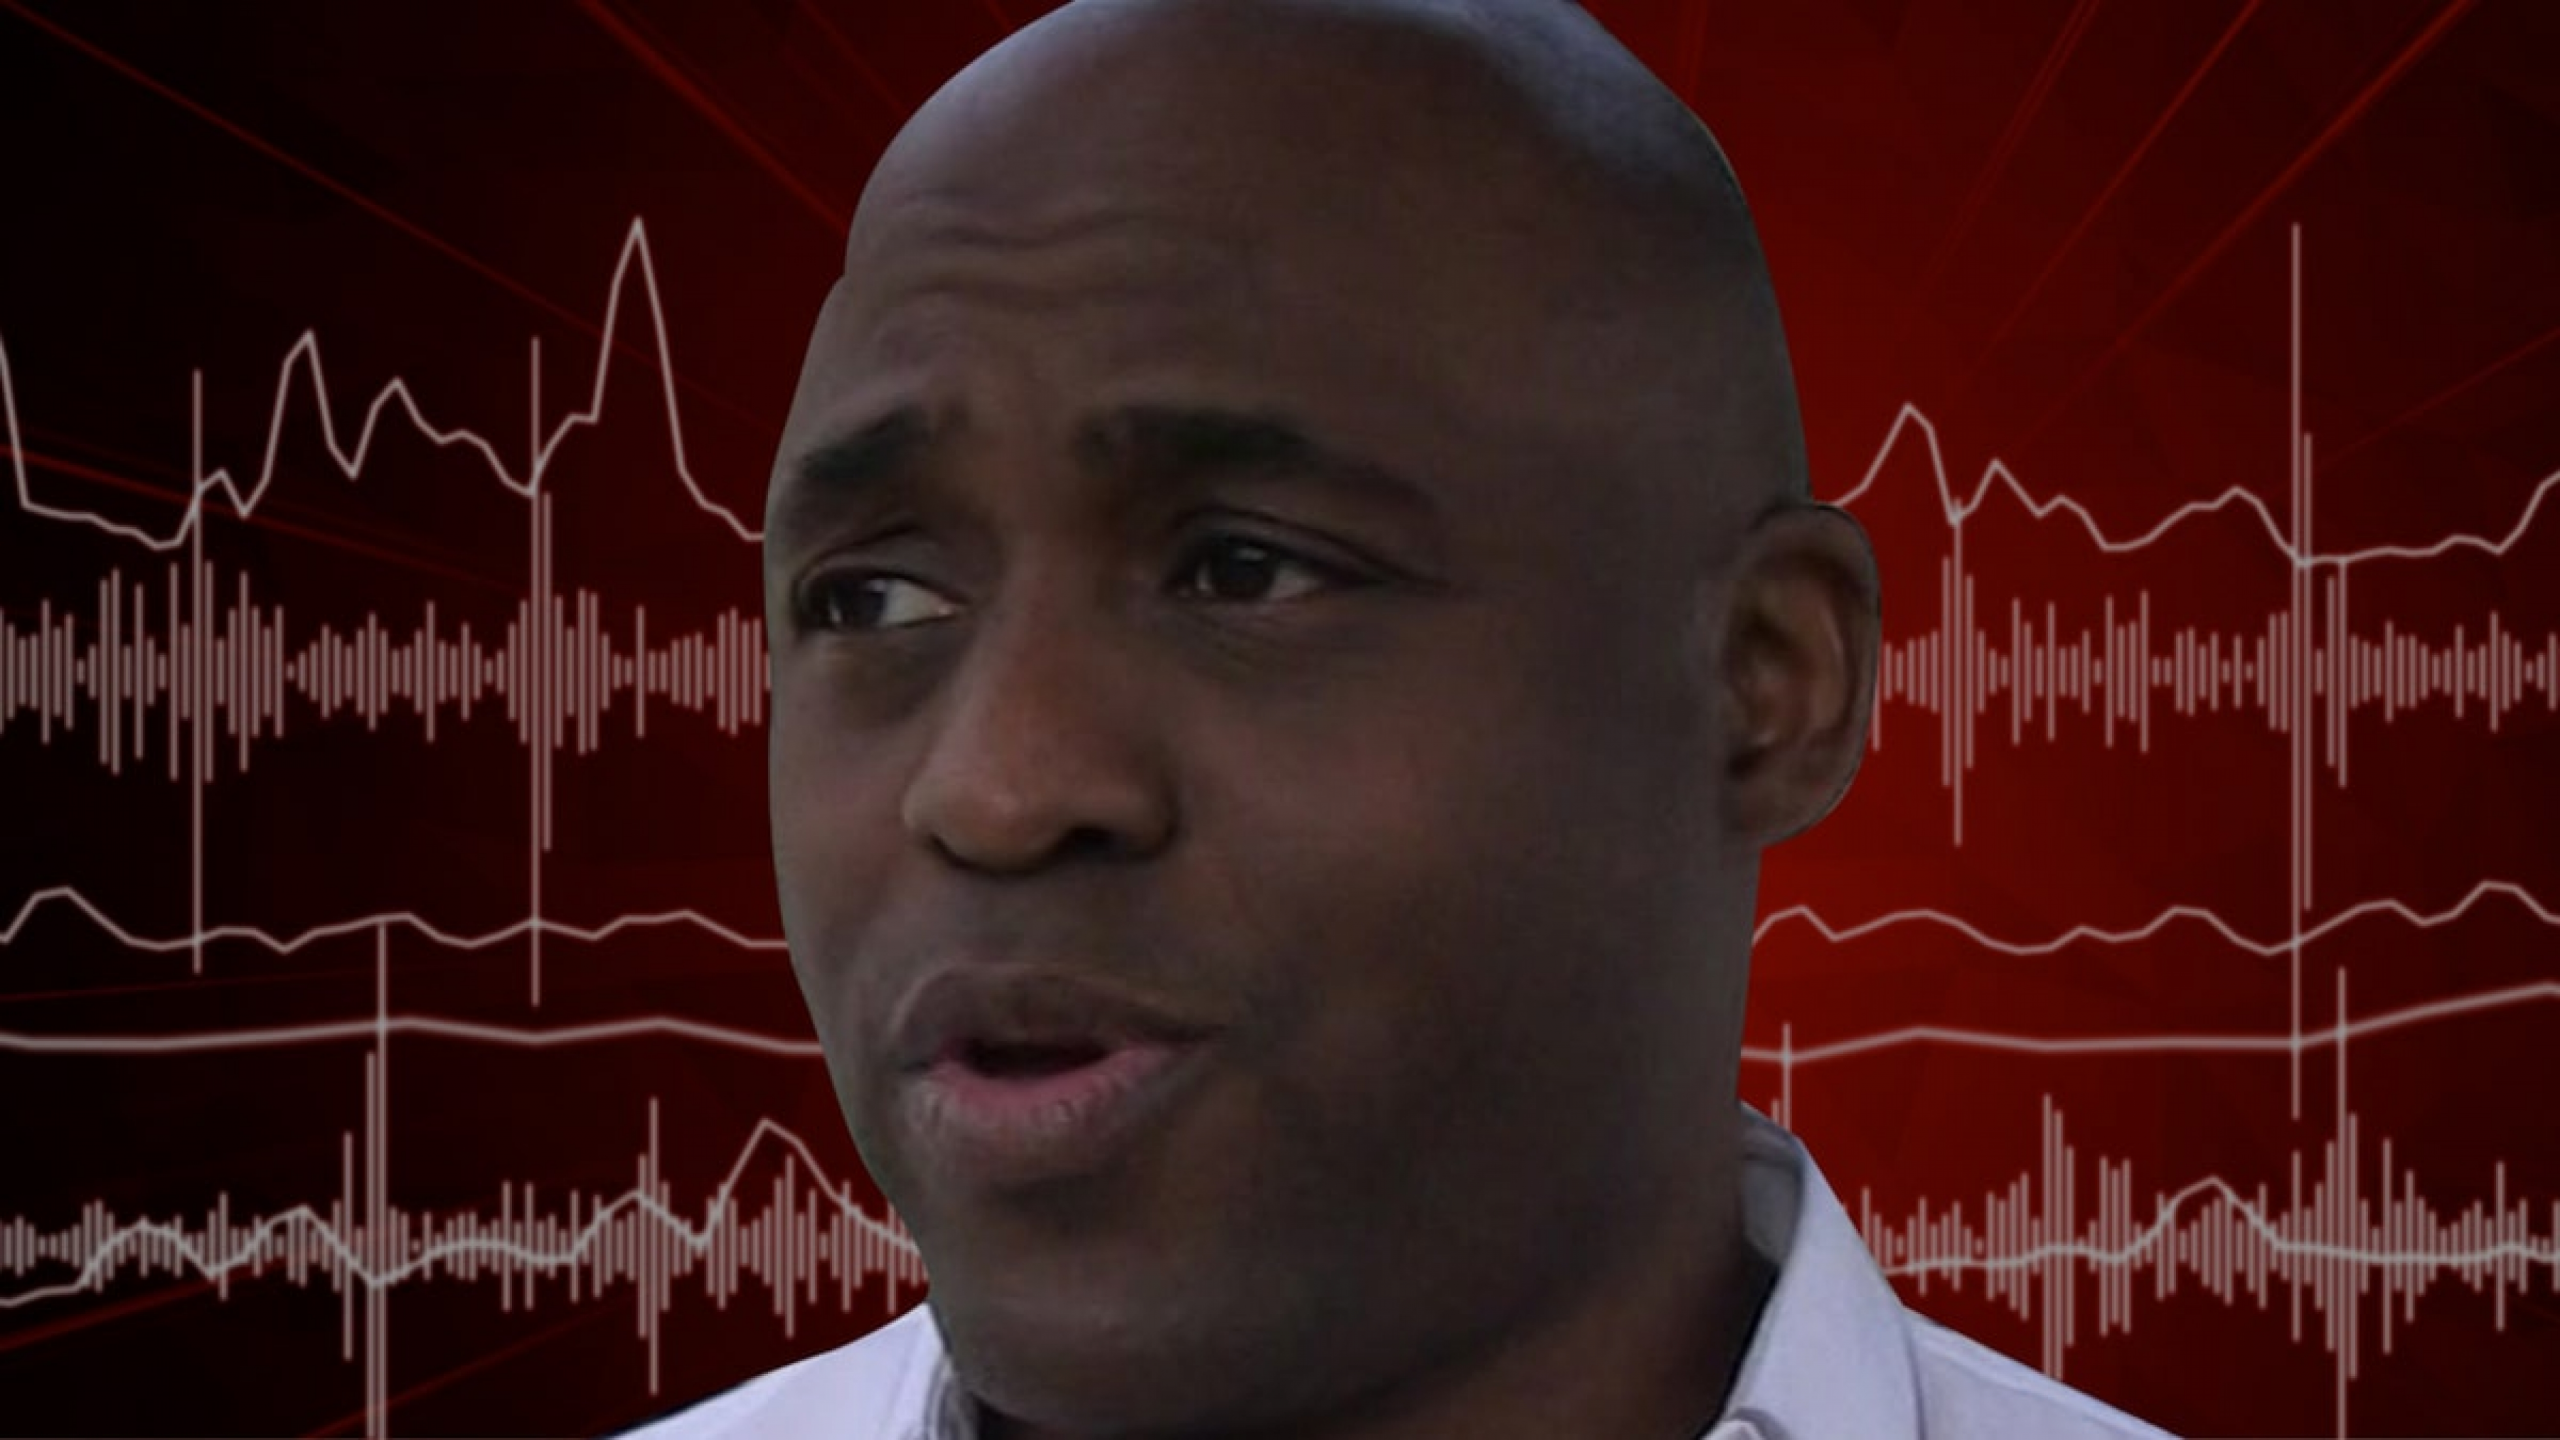 Wayne Brady Gets Racist, Expletive-Laced Voicemail at CBS Studio